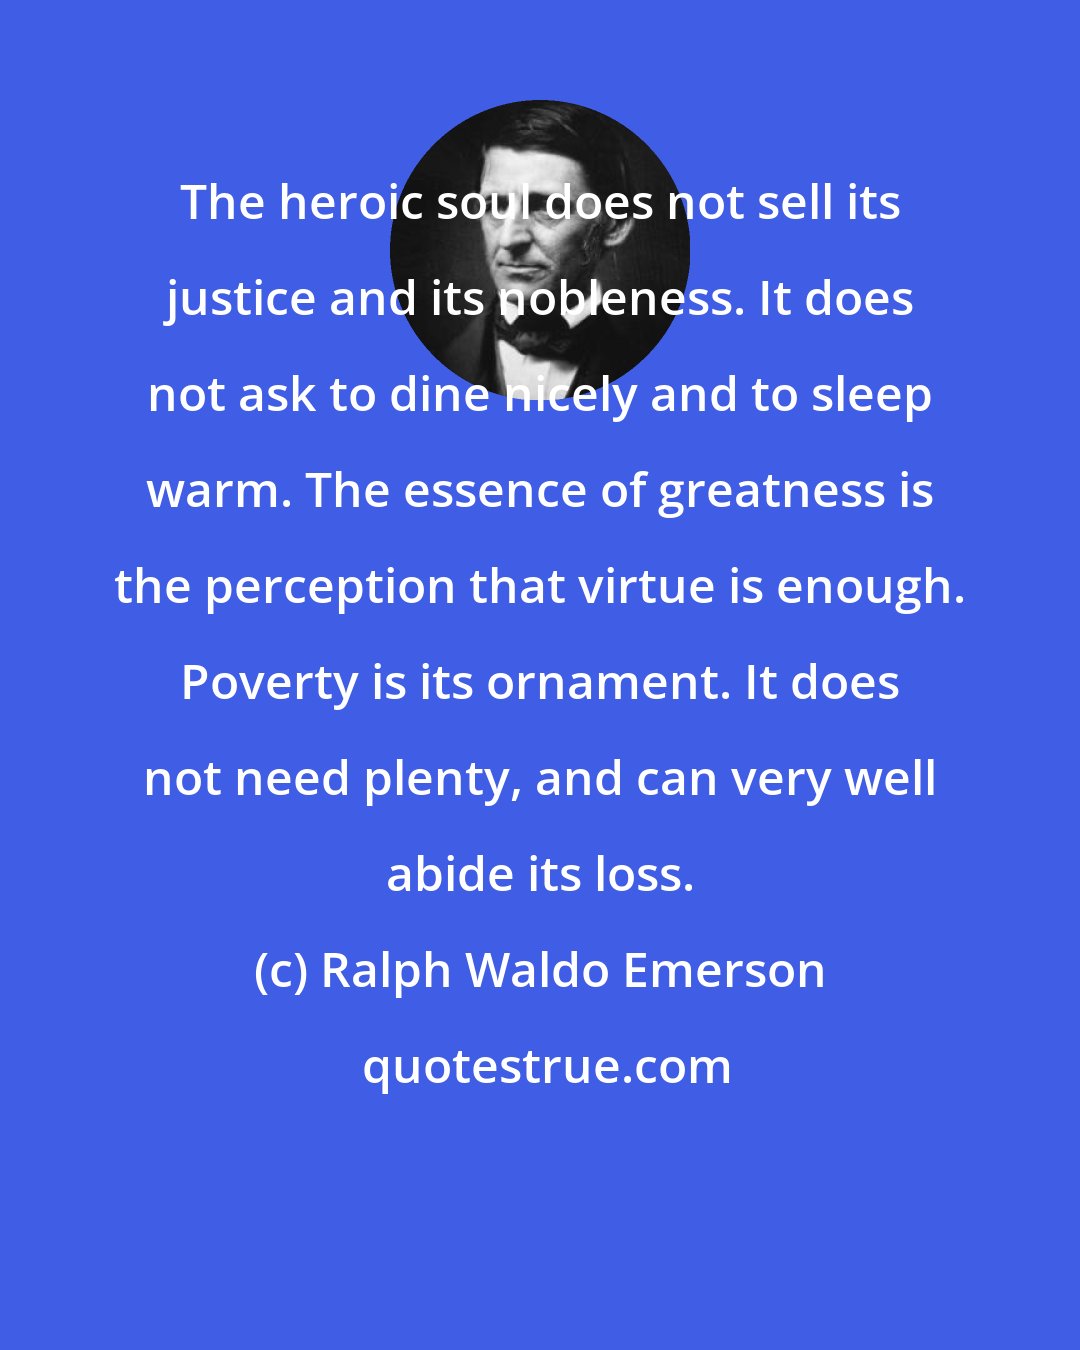 Ralph Waldo Emerson: The heroic soul does not sell its justice and its nobleness. It does not ask to dine nicely and to sleep warm. The essence of greatness is the perception that virtue is enough. Poverty is its ornament. It does not need plenty, and can very well abide its loss.